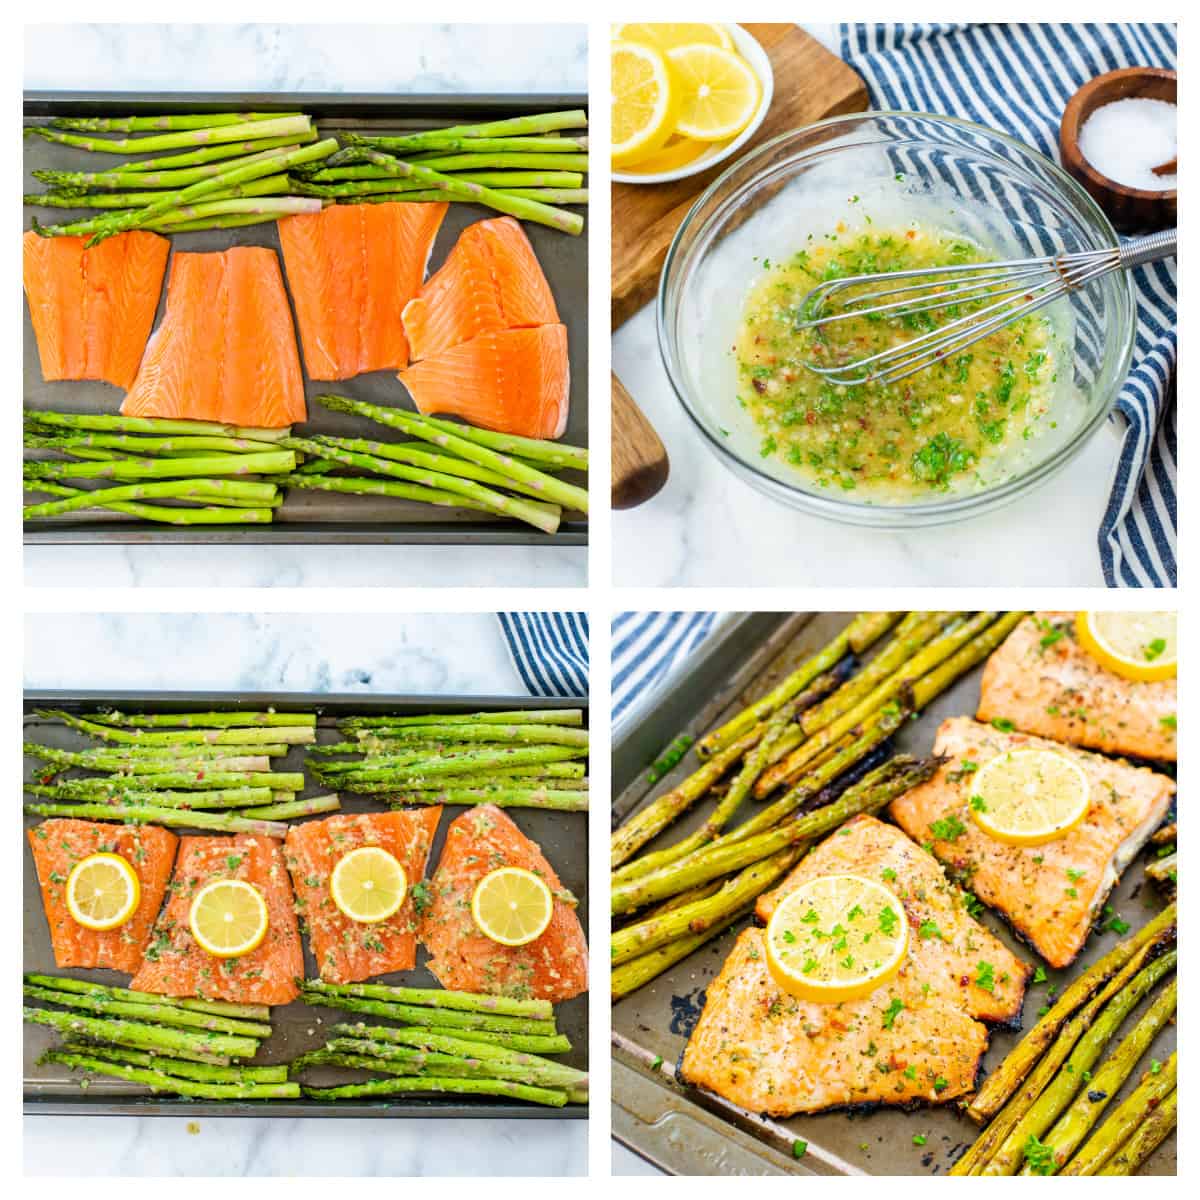 Collage showing how to make honey garlic salmon and asparagus.